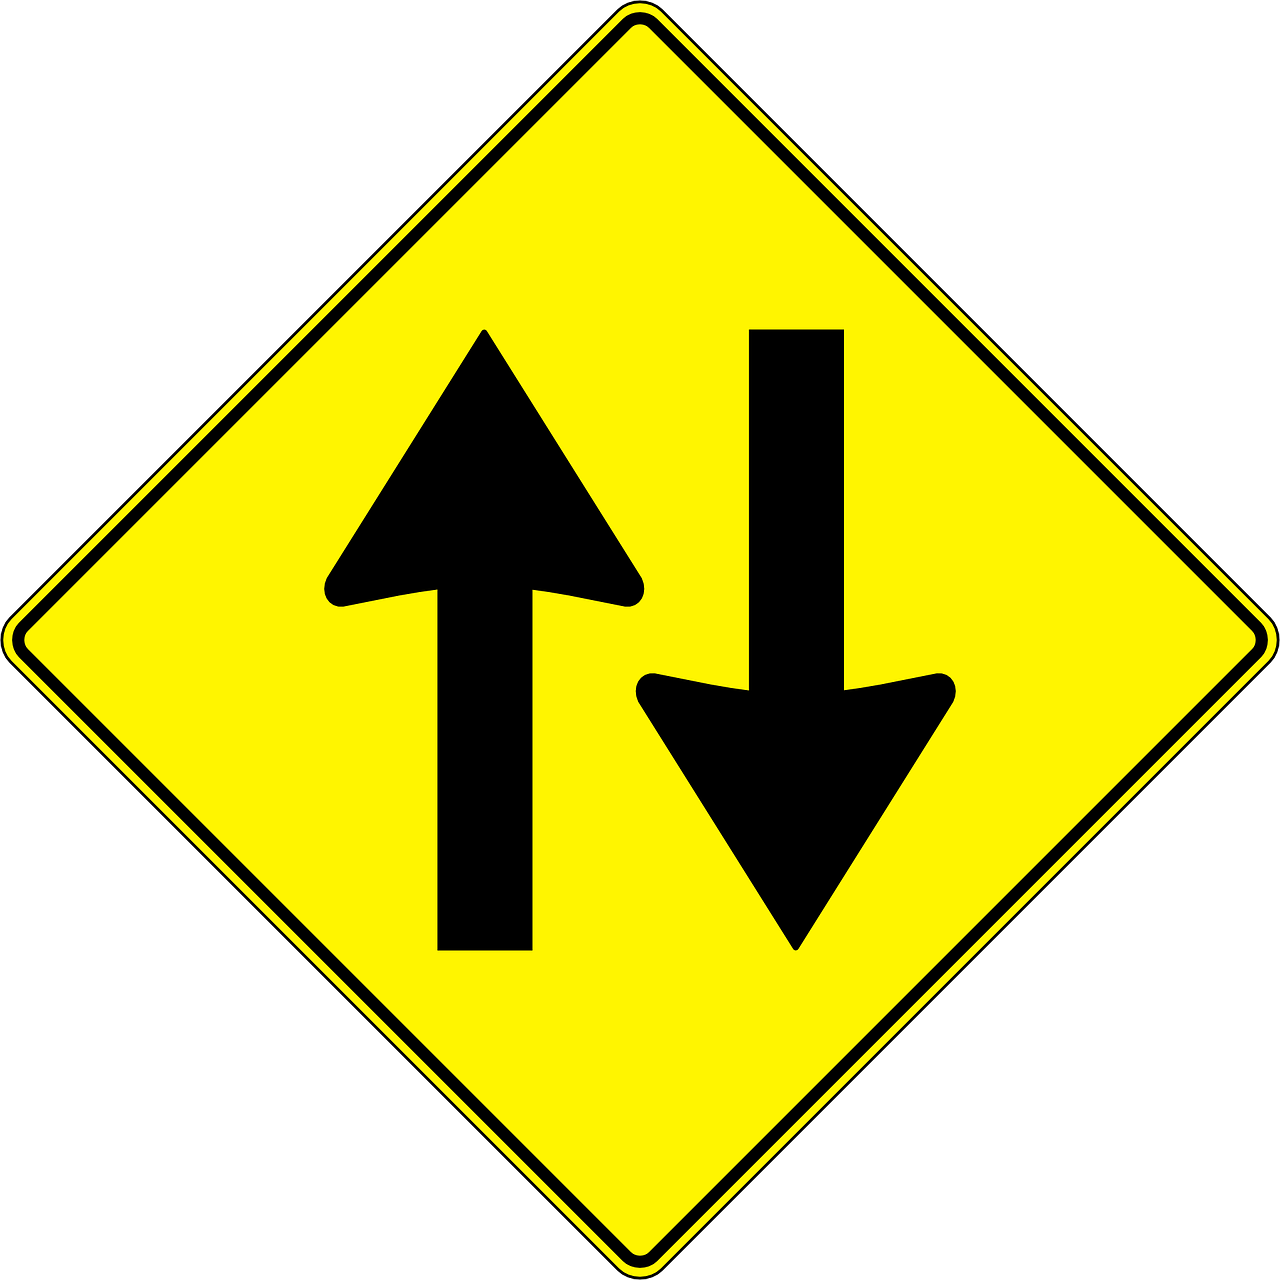 two way street traffic signs free photo